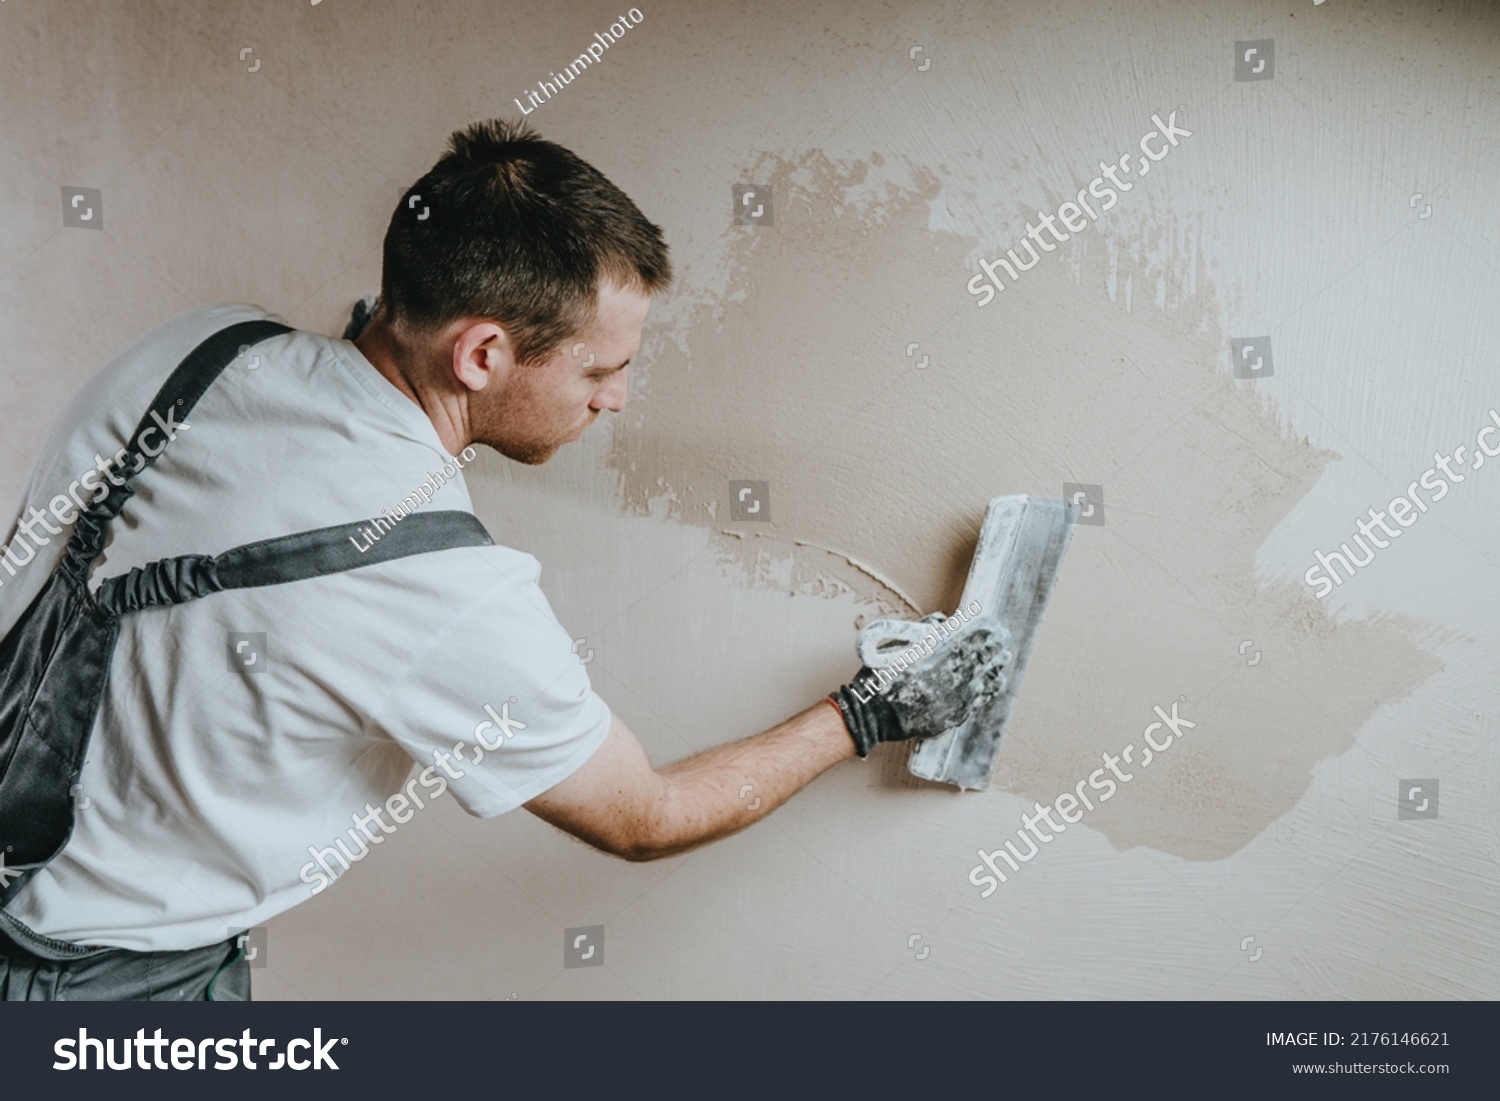 Male builder in work overalls plastering a wall using a construction trowel. Horizontal panorama banner with blank space for text. #2176146621